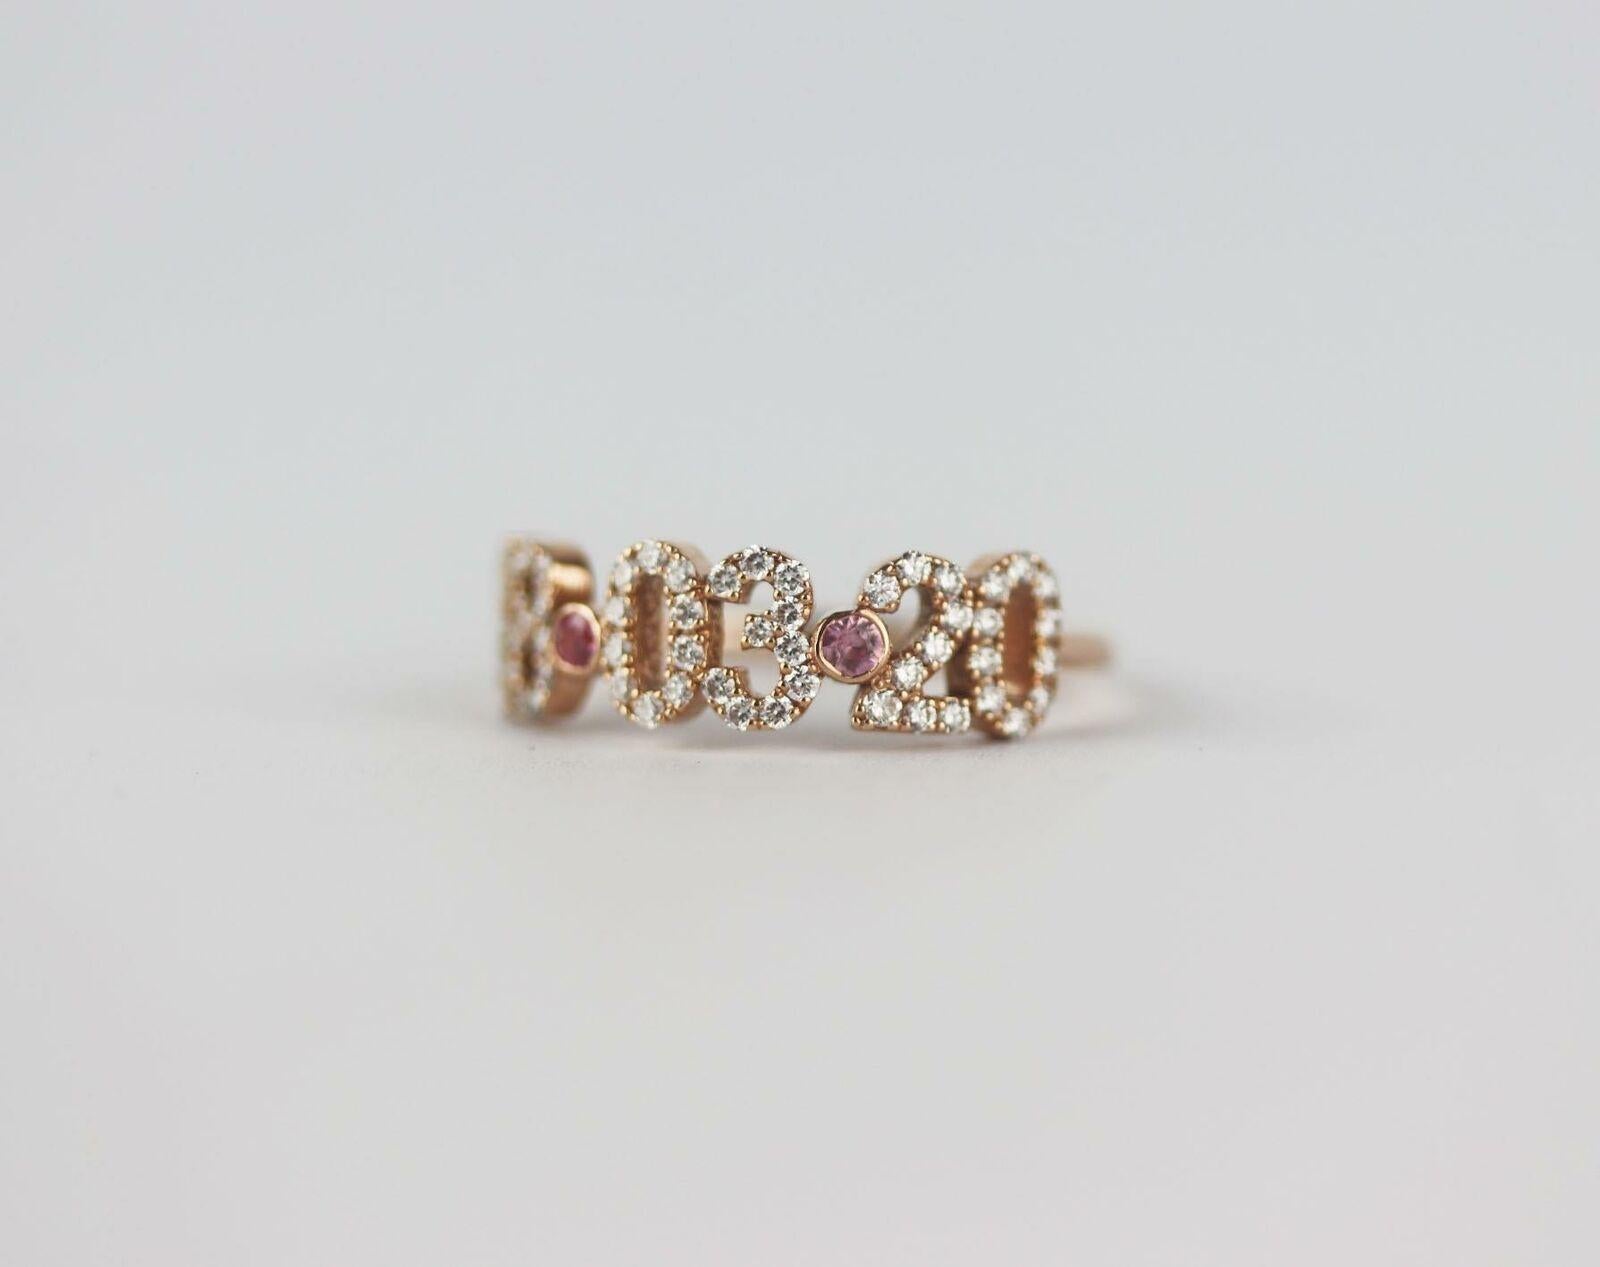 An 14k rose gold pave diamond and tourmaline date ring by Stephanie Gottlieb + Noush Jewelry, this ring comprises of pink tourmaline and round brilliant cut pave diamonds in the formation of the date '18.03.20'.
14K Rose gold, diamonds and pink